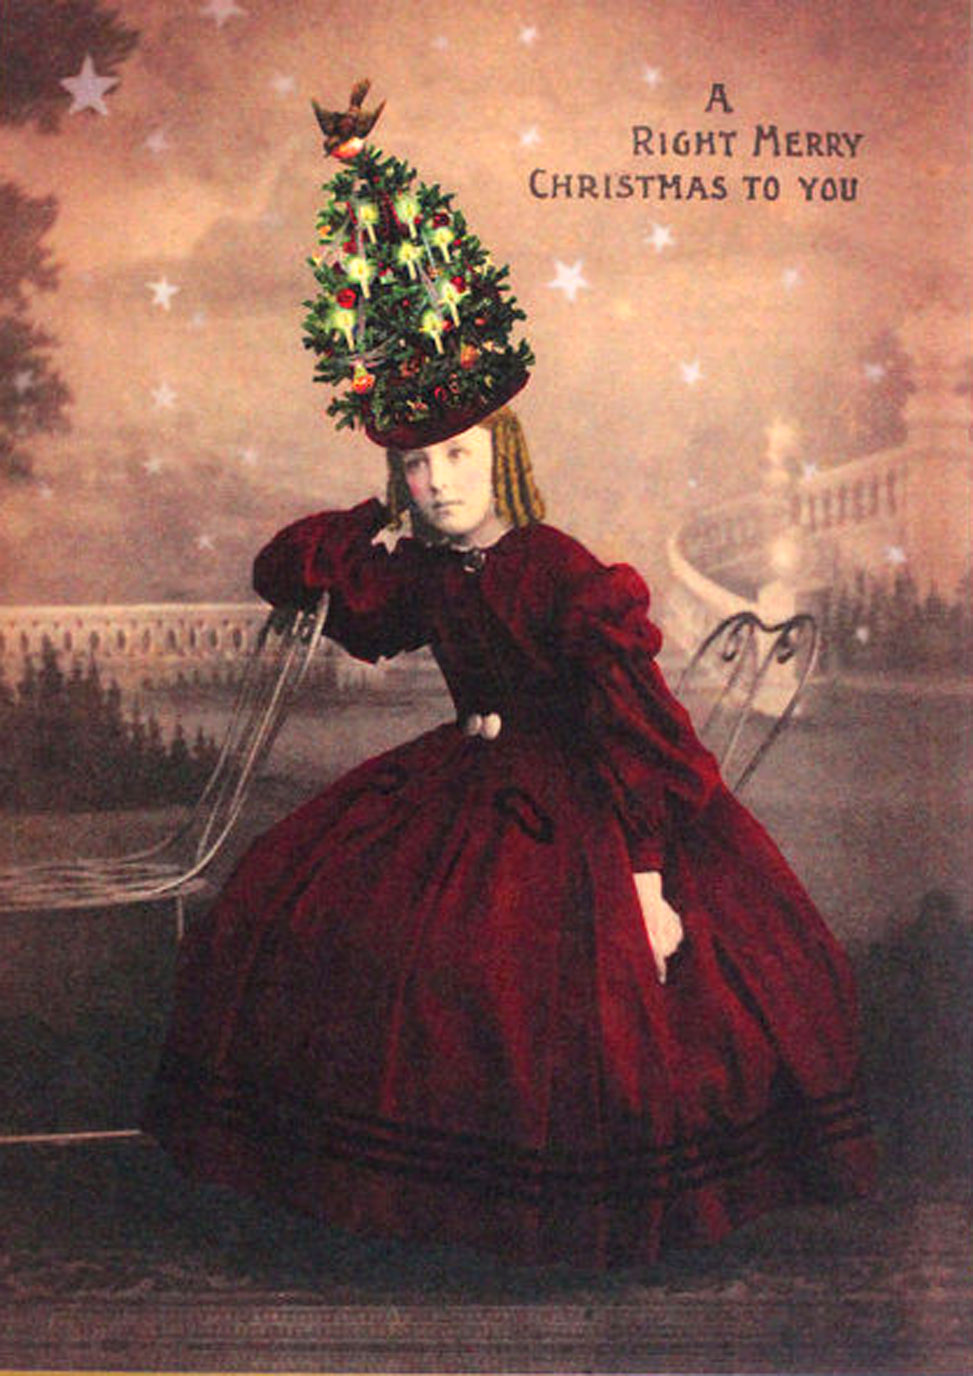 Woman with Christmas tree on her head - funny vintage Xmas postcard